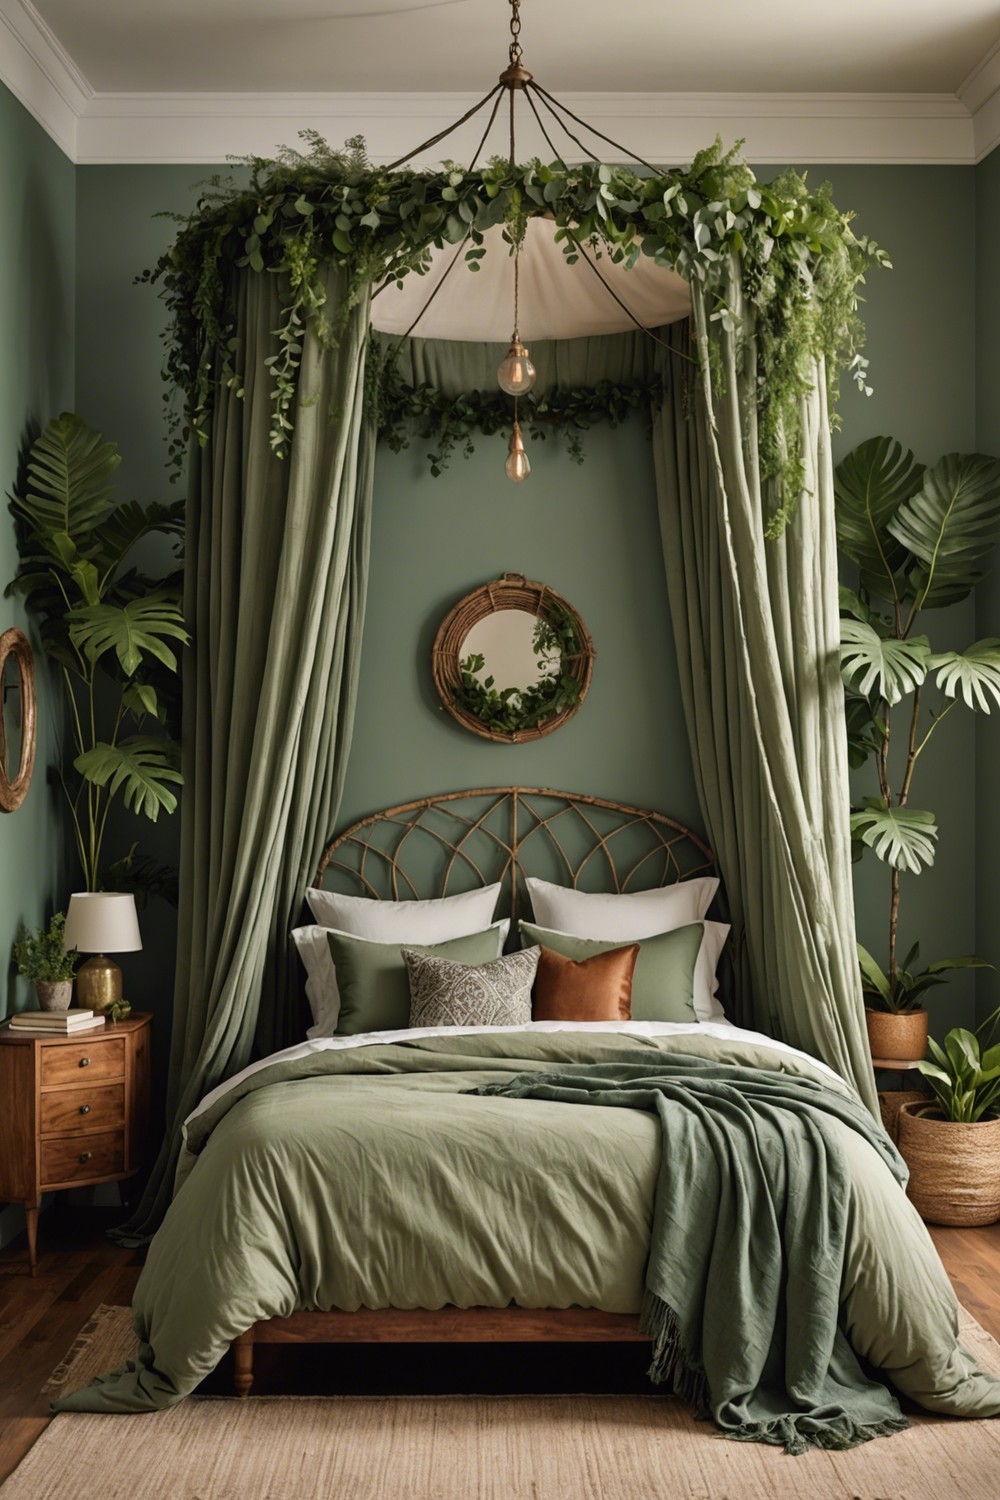 Create a Sage Green Canopy Bed with Draped Fabric